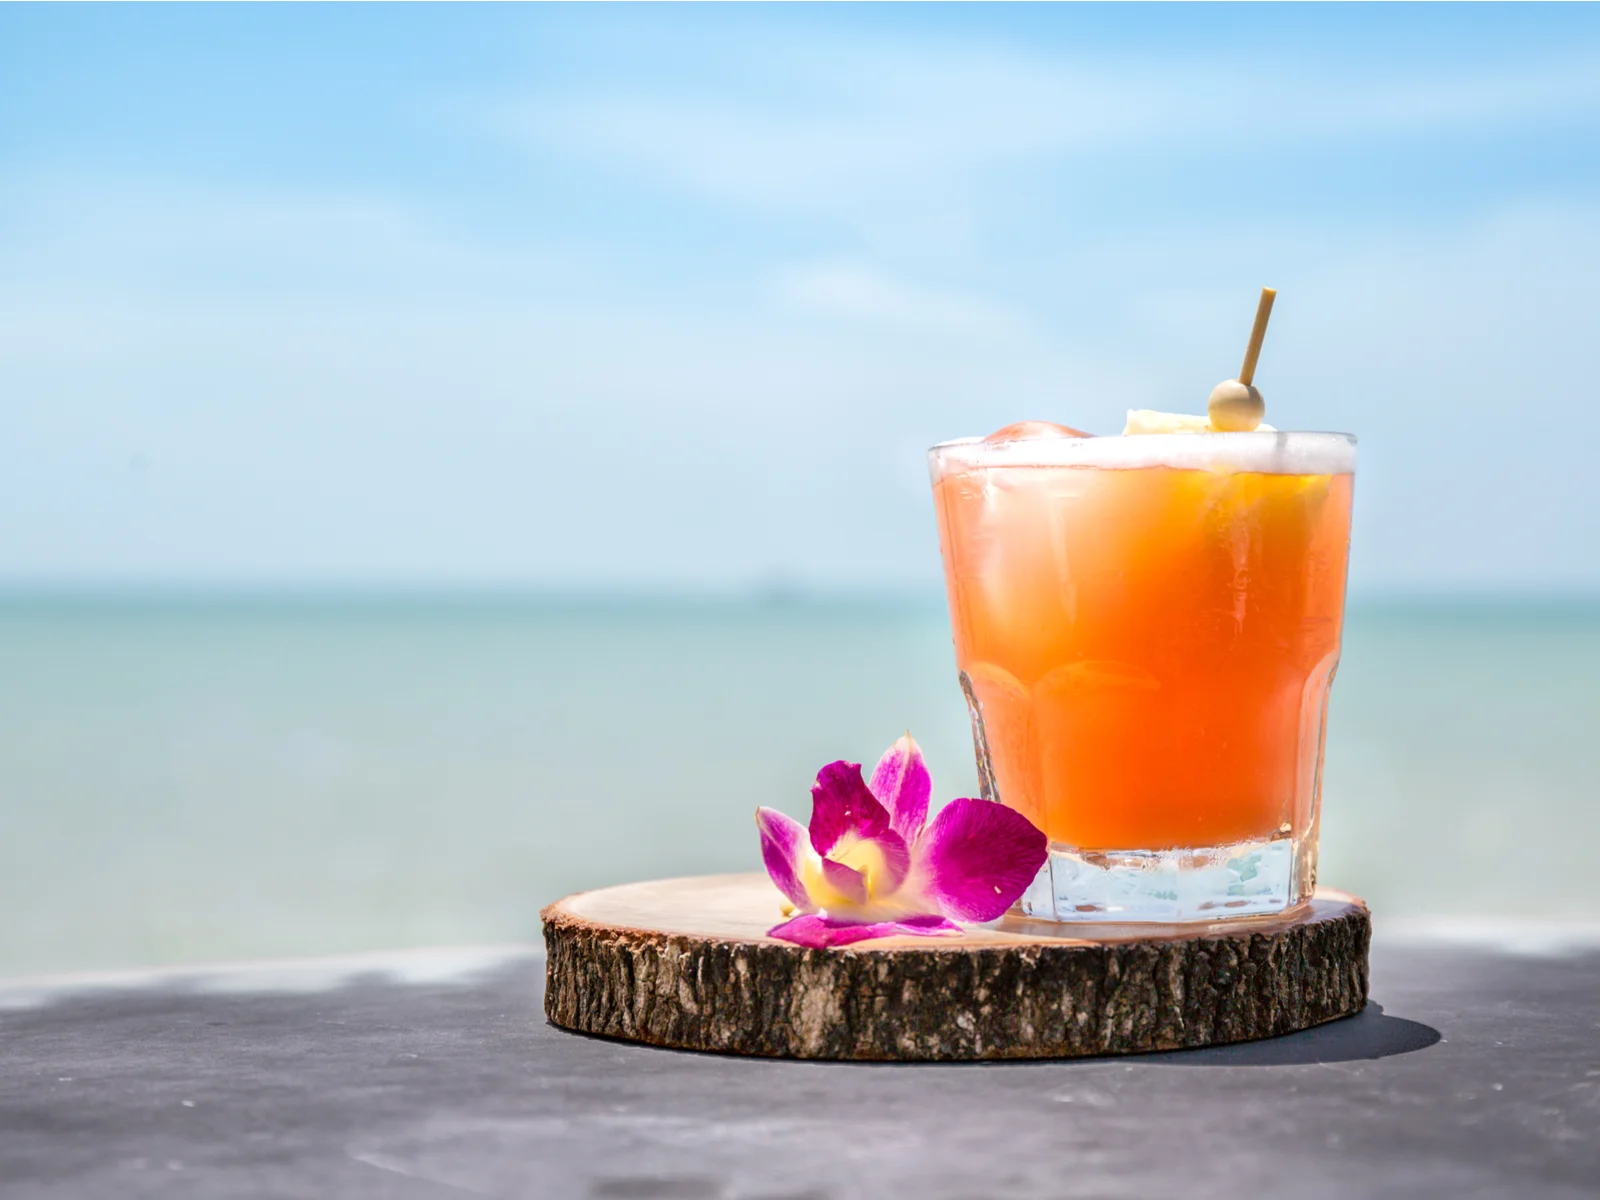 A refreshing glass of Mai Tai on a circular wooden piece with a flower served cold during a hot summer at On The Rocks, one of the best restaurants in Kona, Hawaii